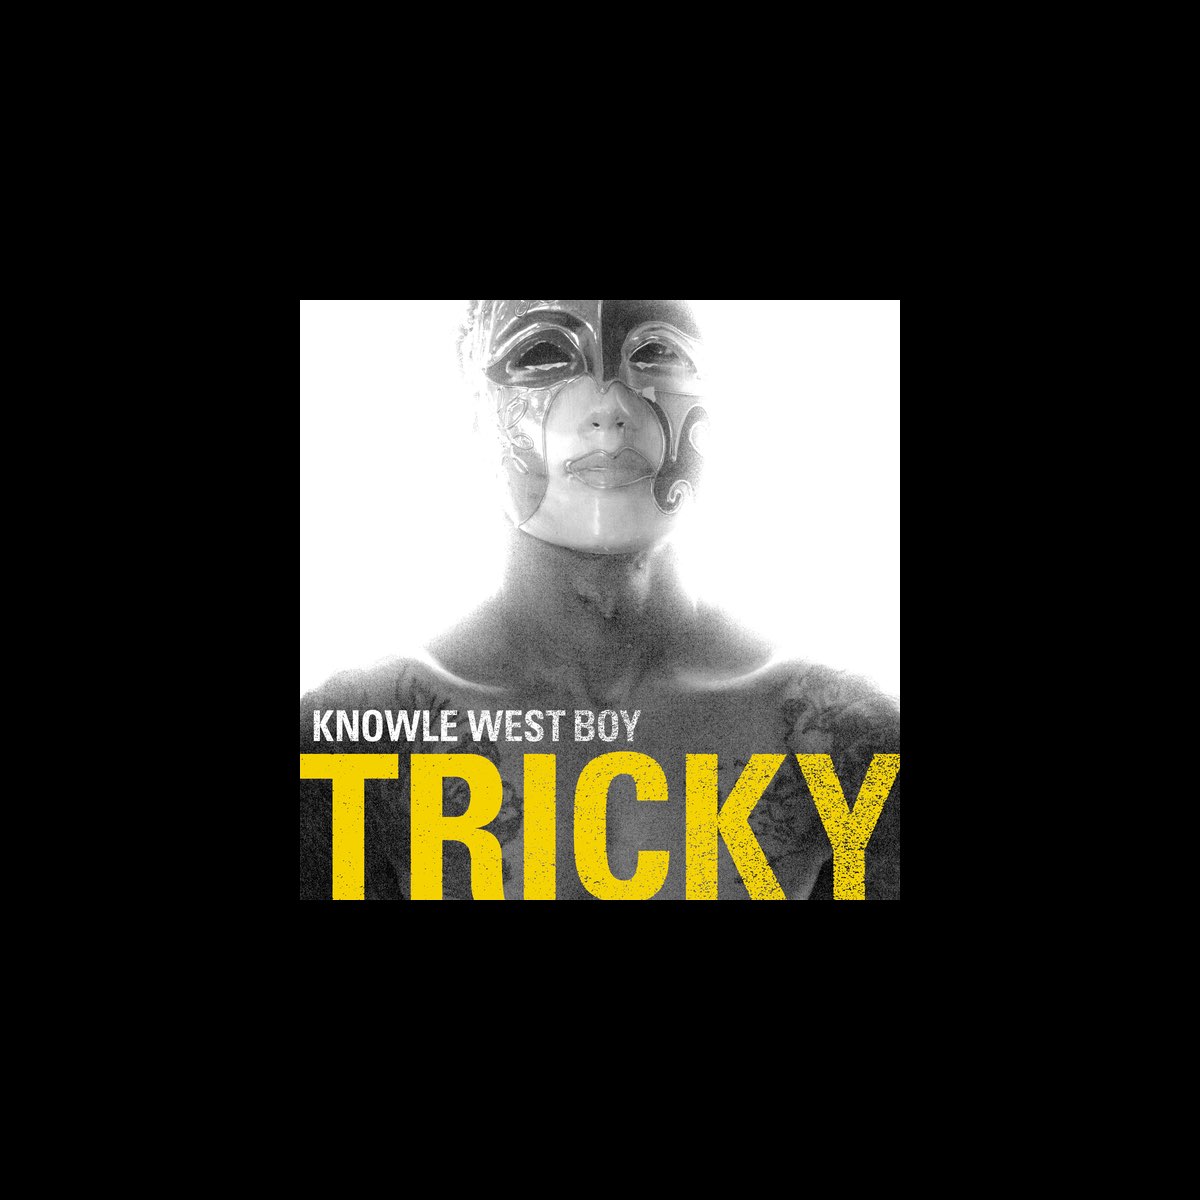 Knowle West Boy (Deluxe Edition) by Tricky on Apple Music